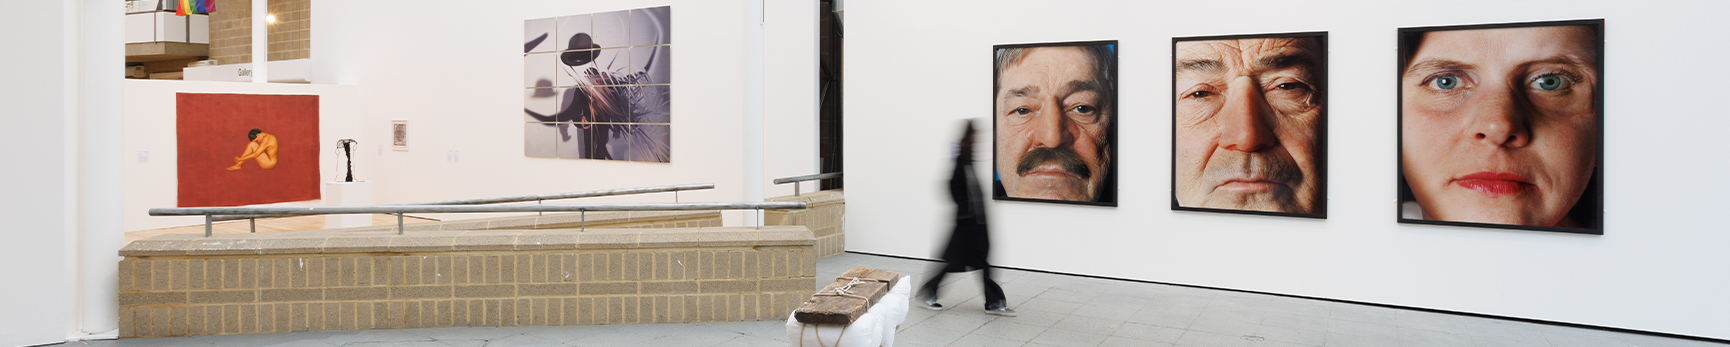 White gallery space with three large close up portraits and an abstract sculpture in the foreground, another large photograph and painting can be seen further away